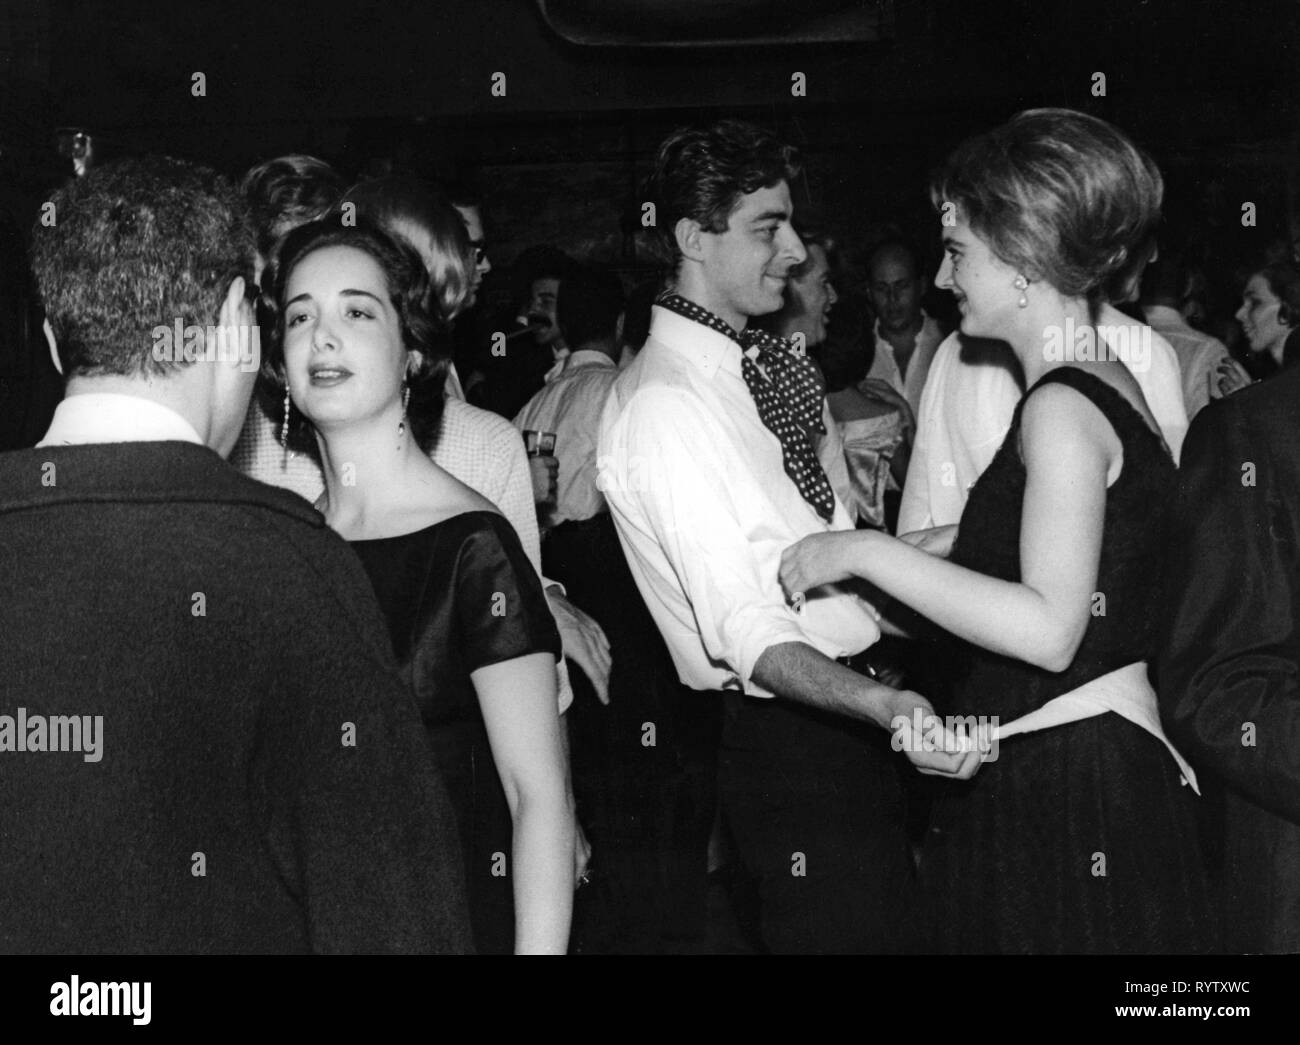 Feste, Parties, Christina Paolozzi tanzt Torsion auf dem Blind Date Kugel, New York City, 20.12.1961, Additional-Rights - Clearance-Info - Not-Available Stockfoto